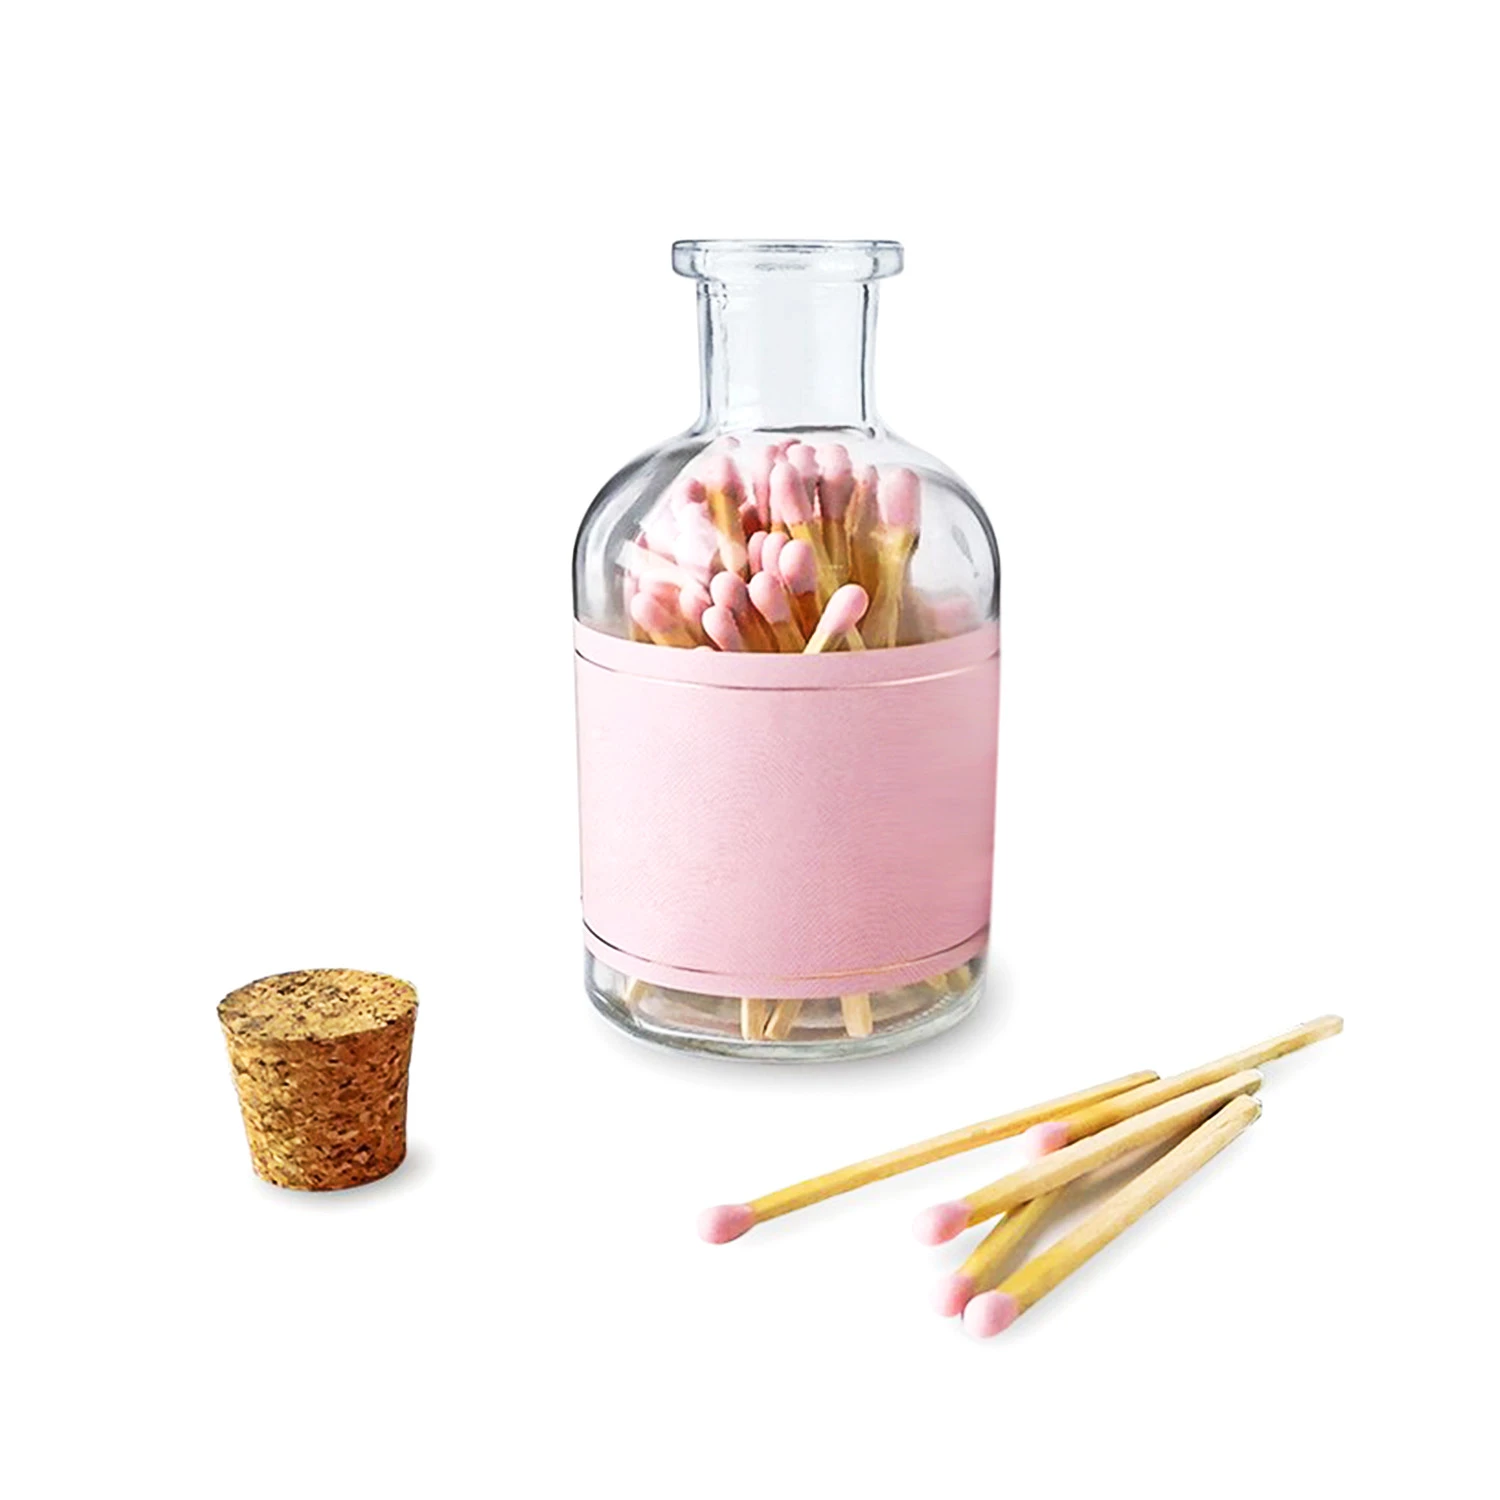 250ml Glass matches bottles with corks and label sticking as customers required